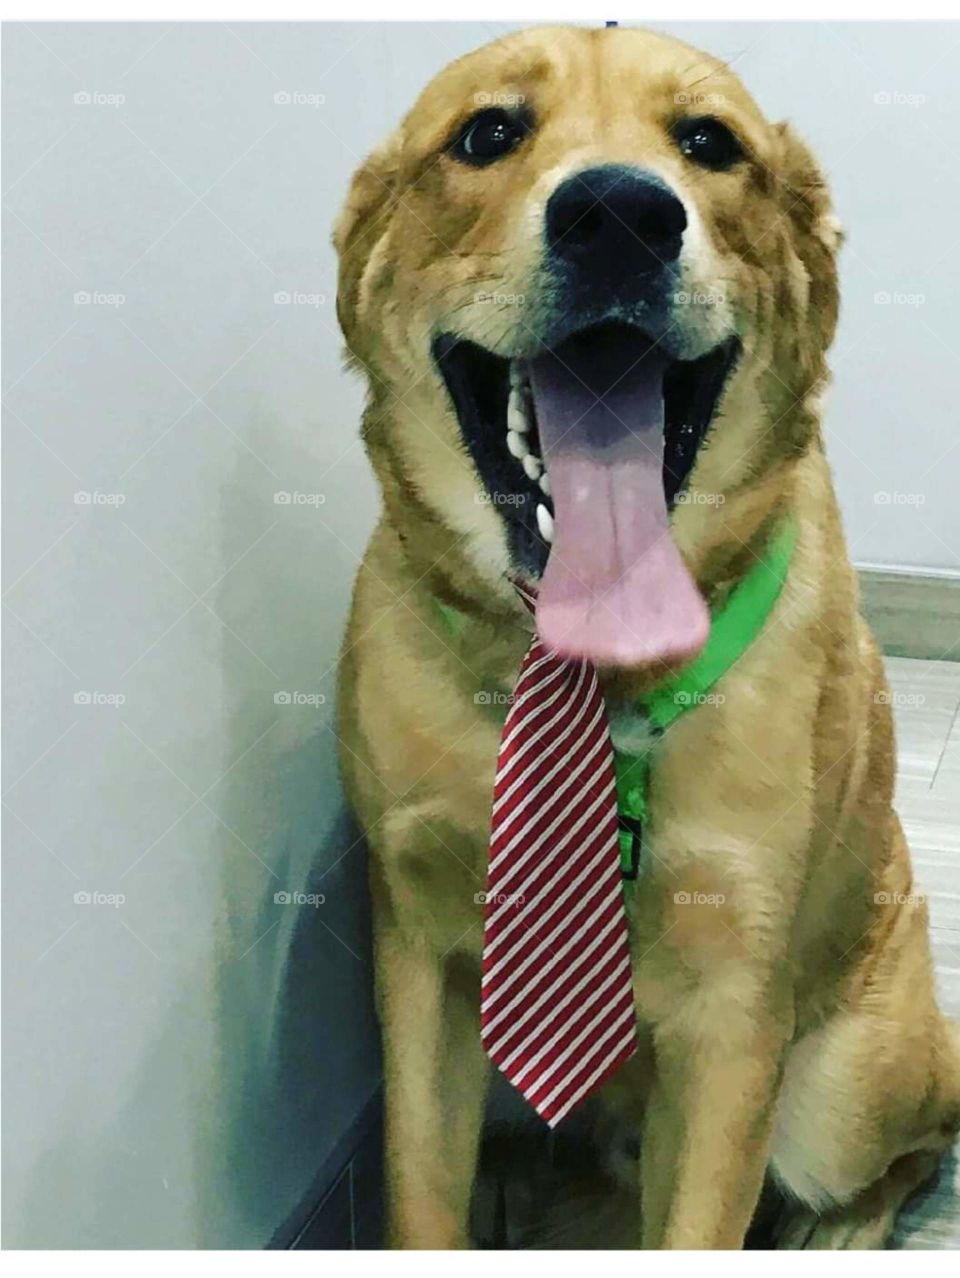 happy dog with a tie